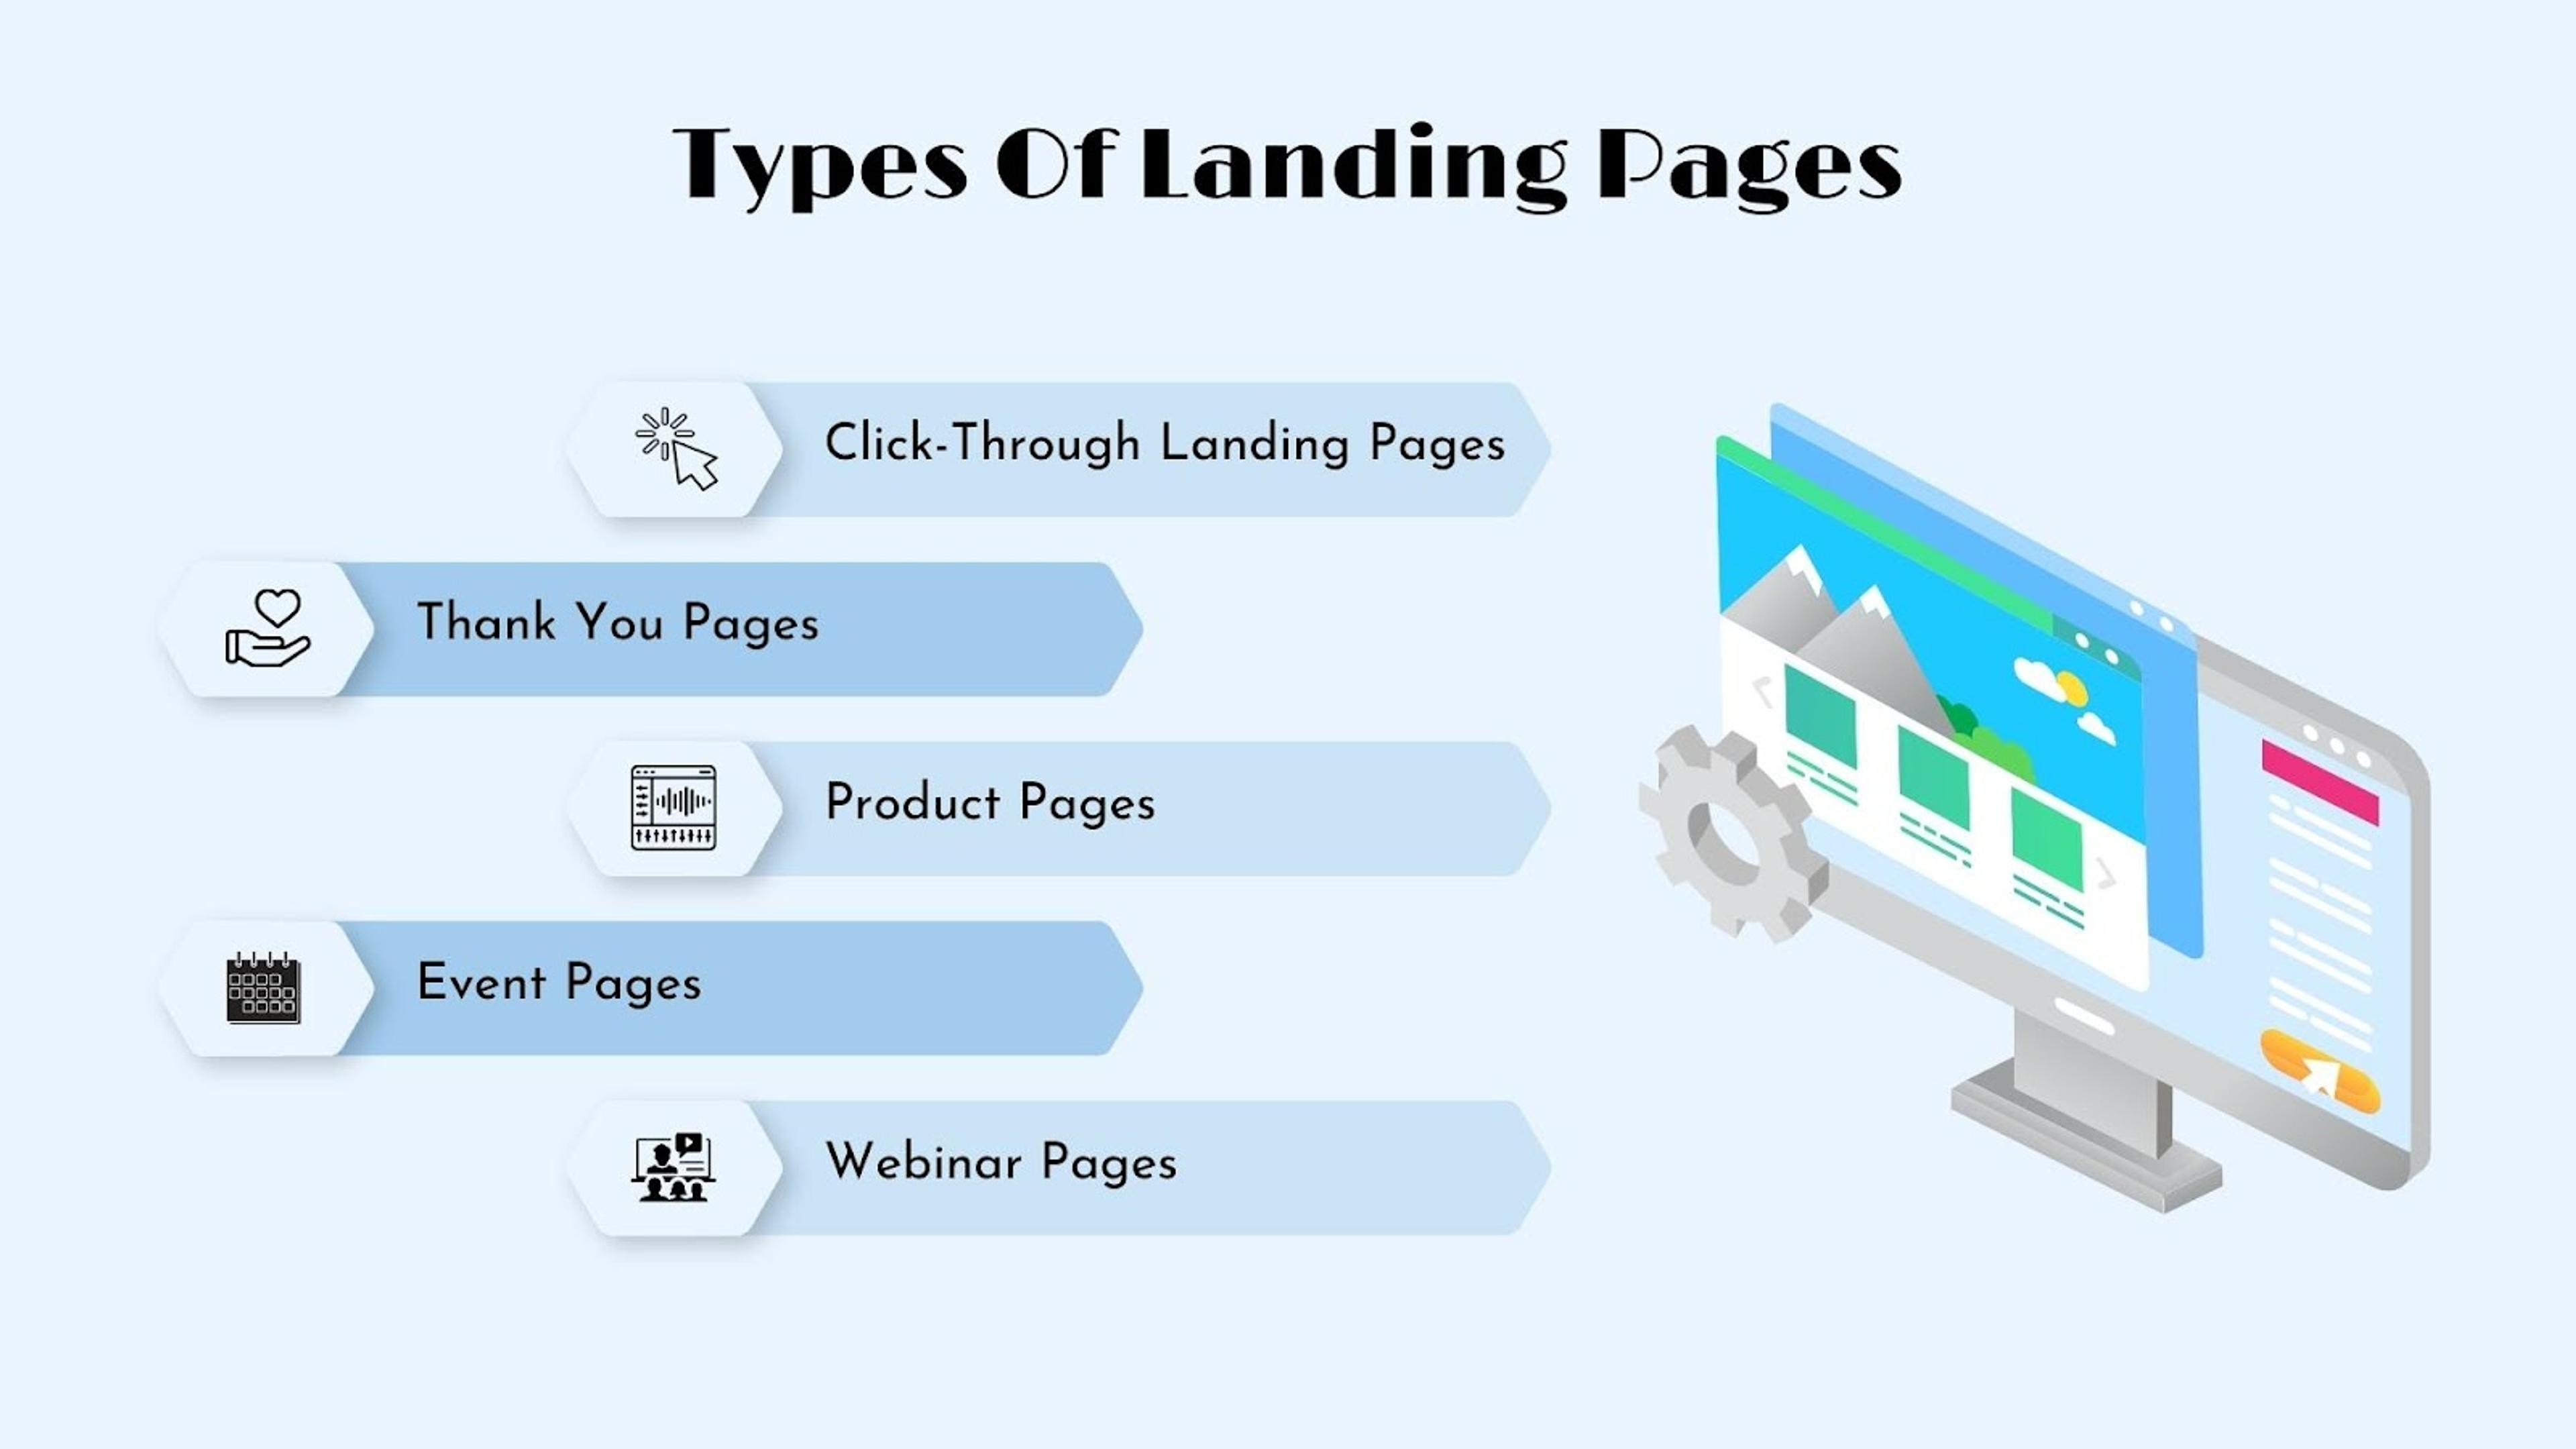 Types of Landing Pages